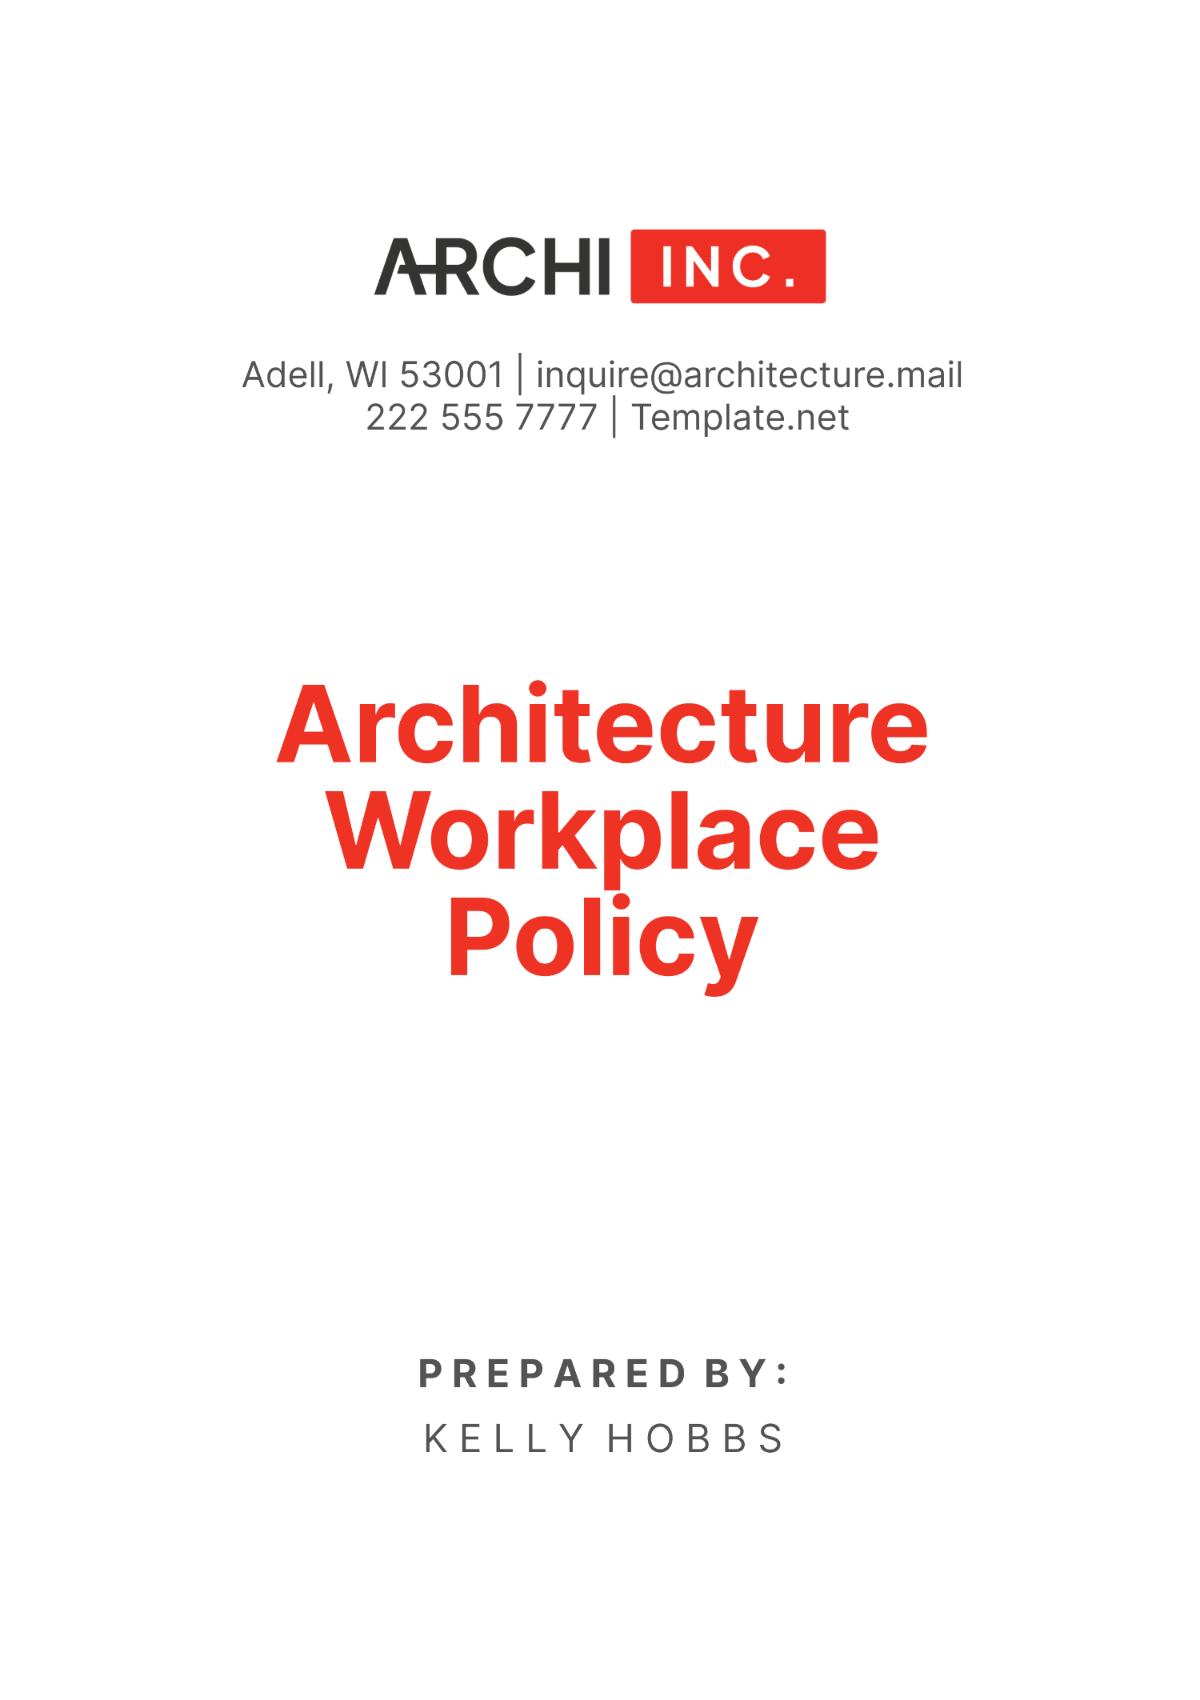 Architecture Workplace Policy Template